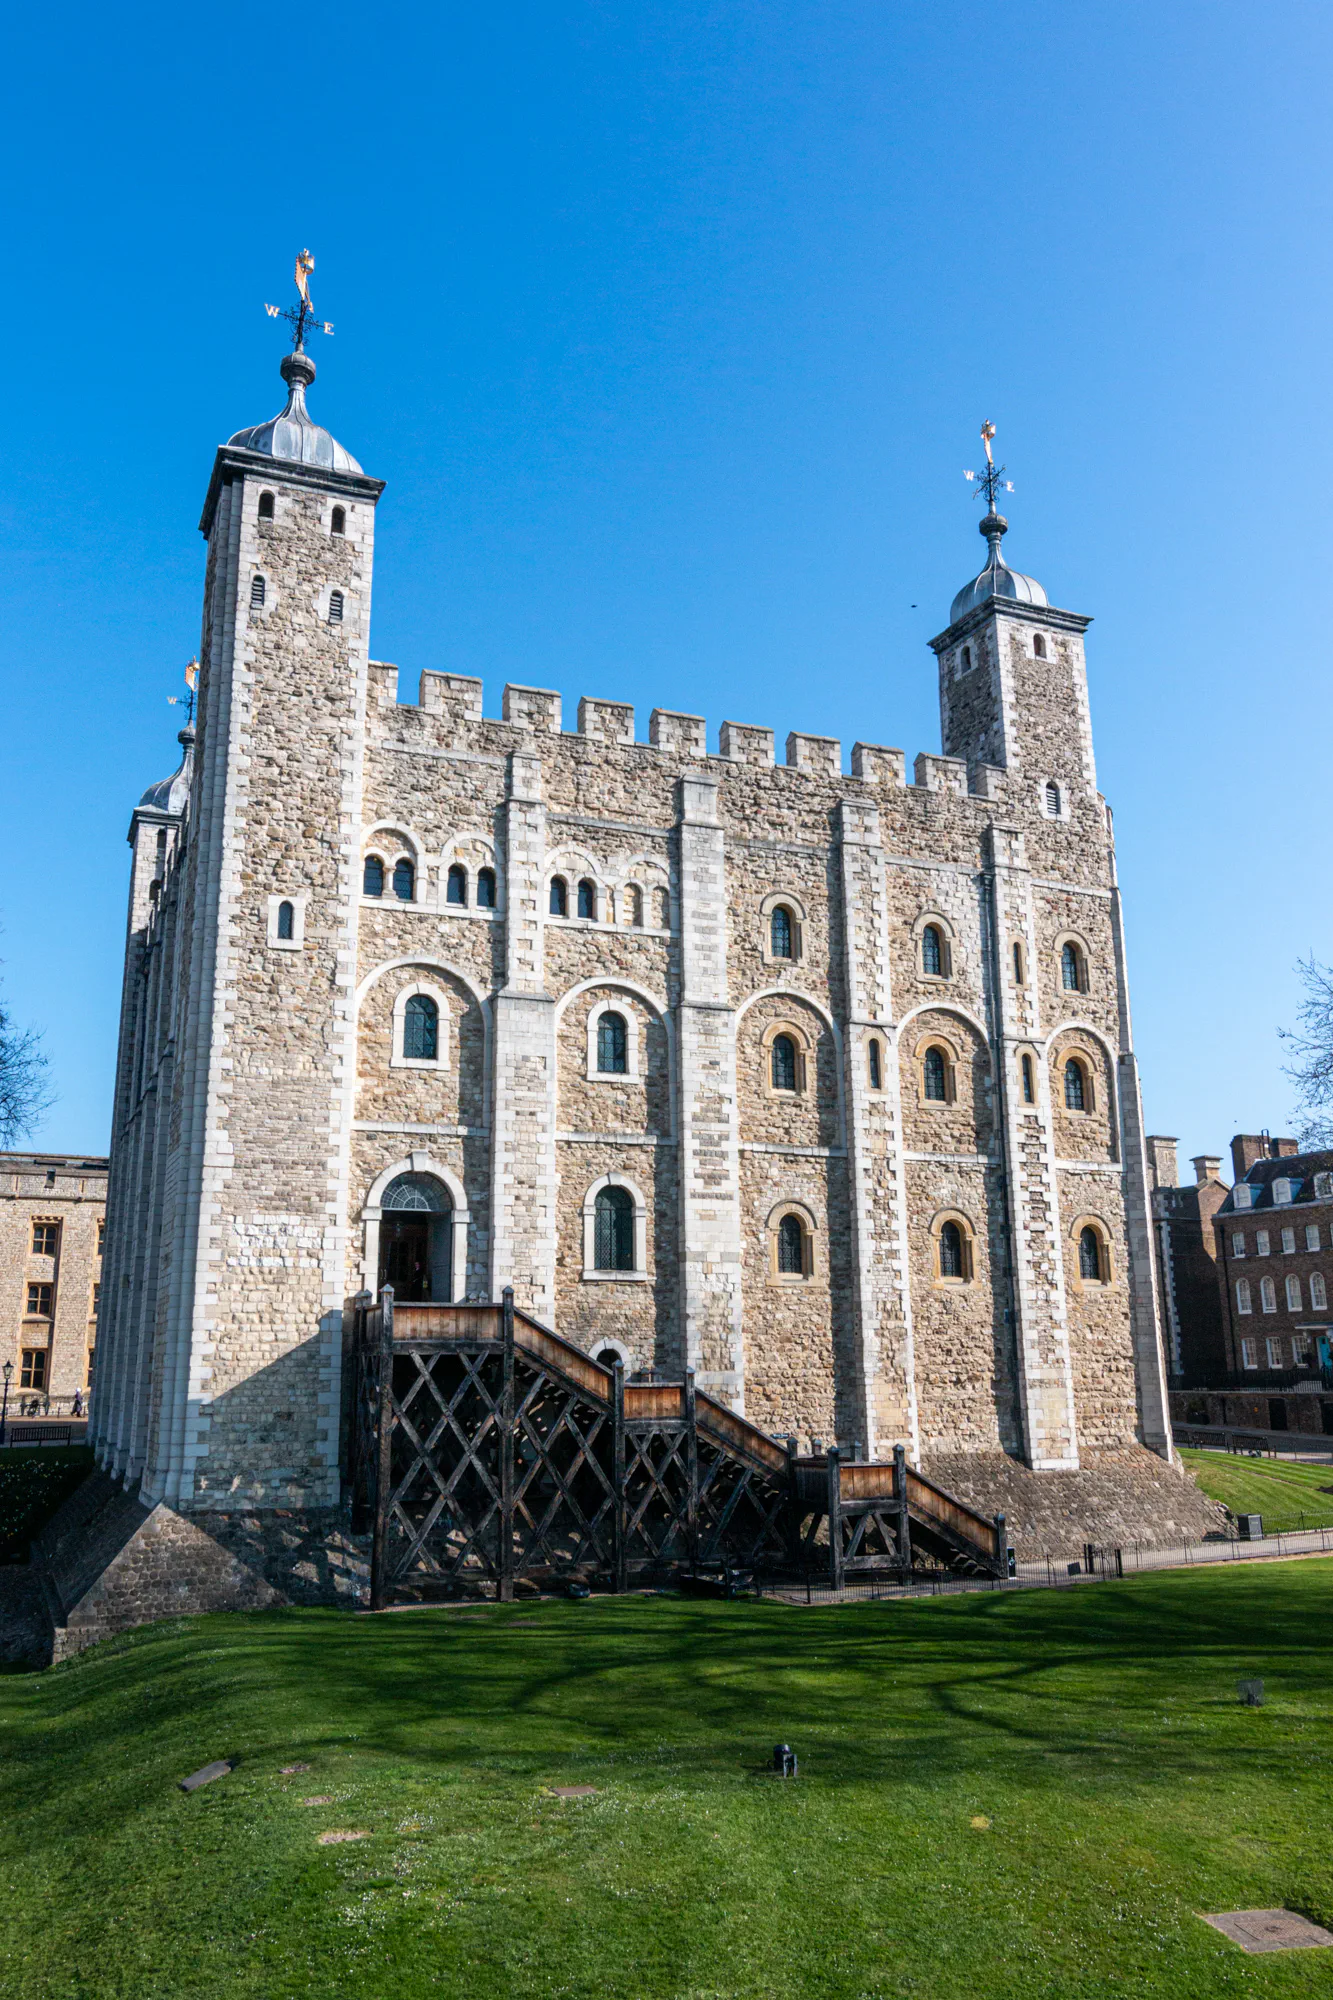 The White Tower